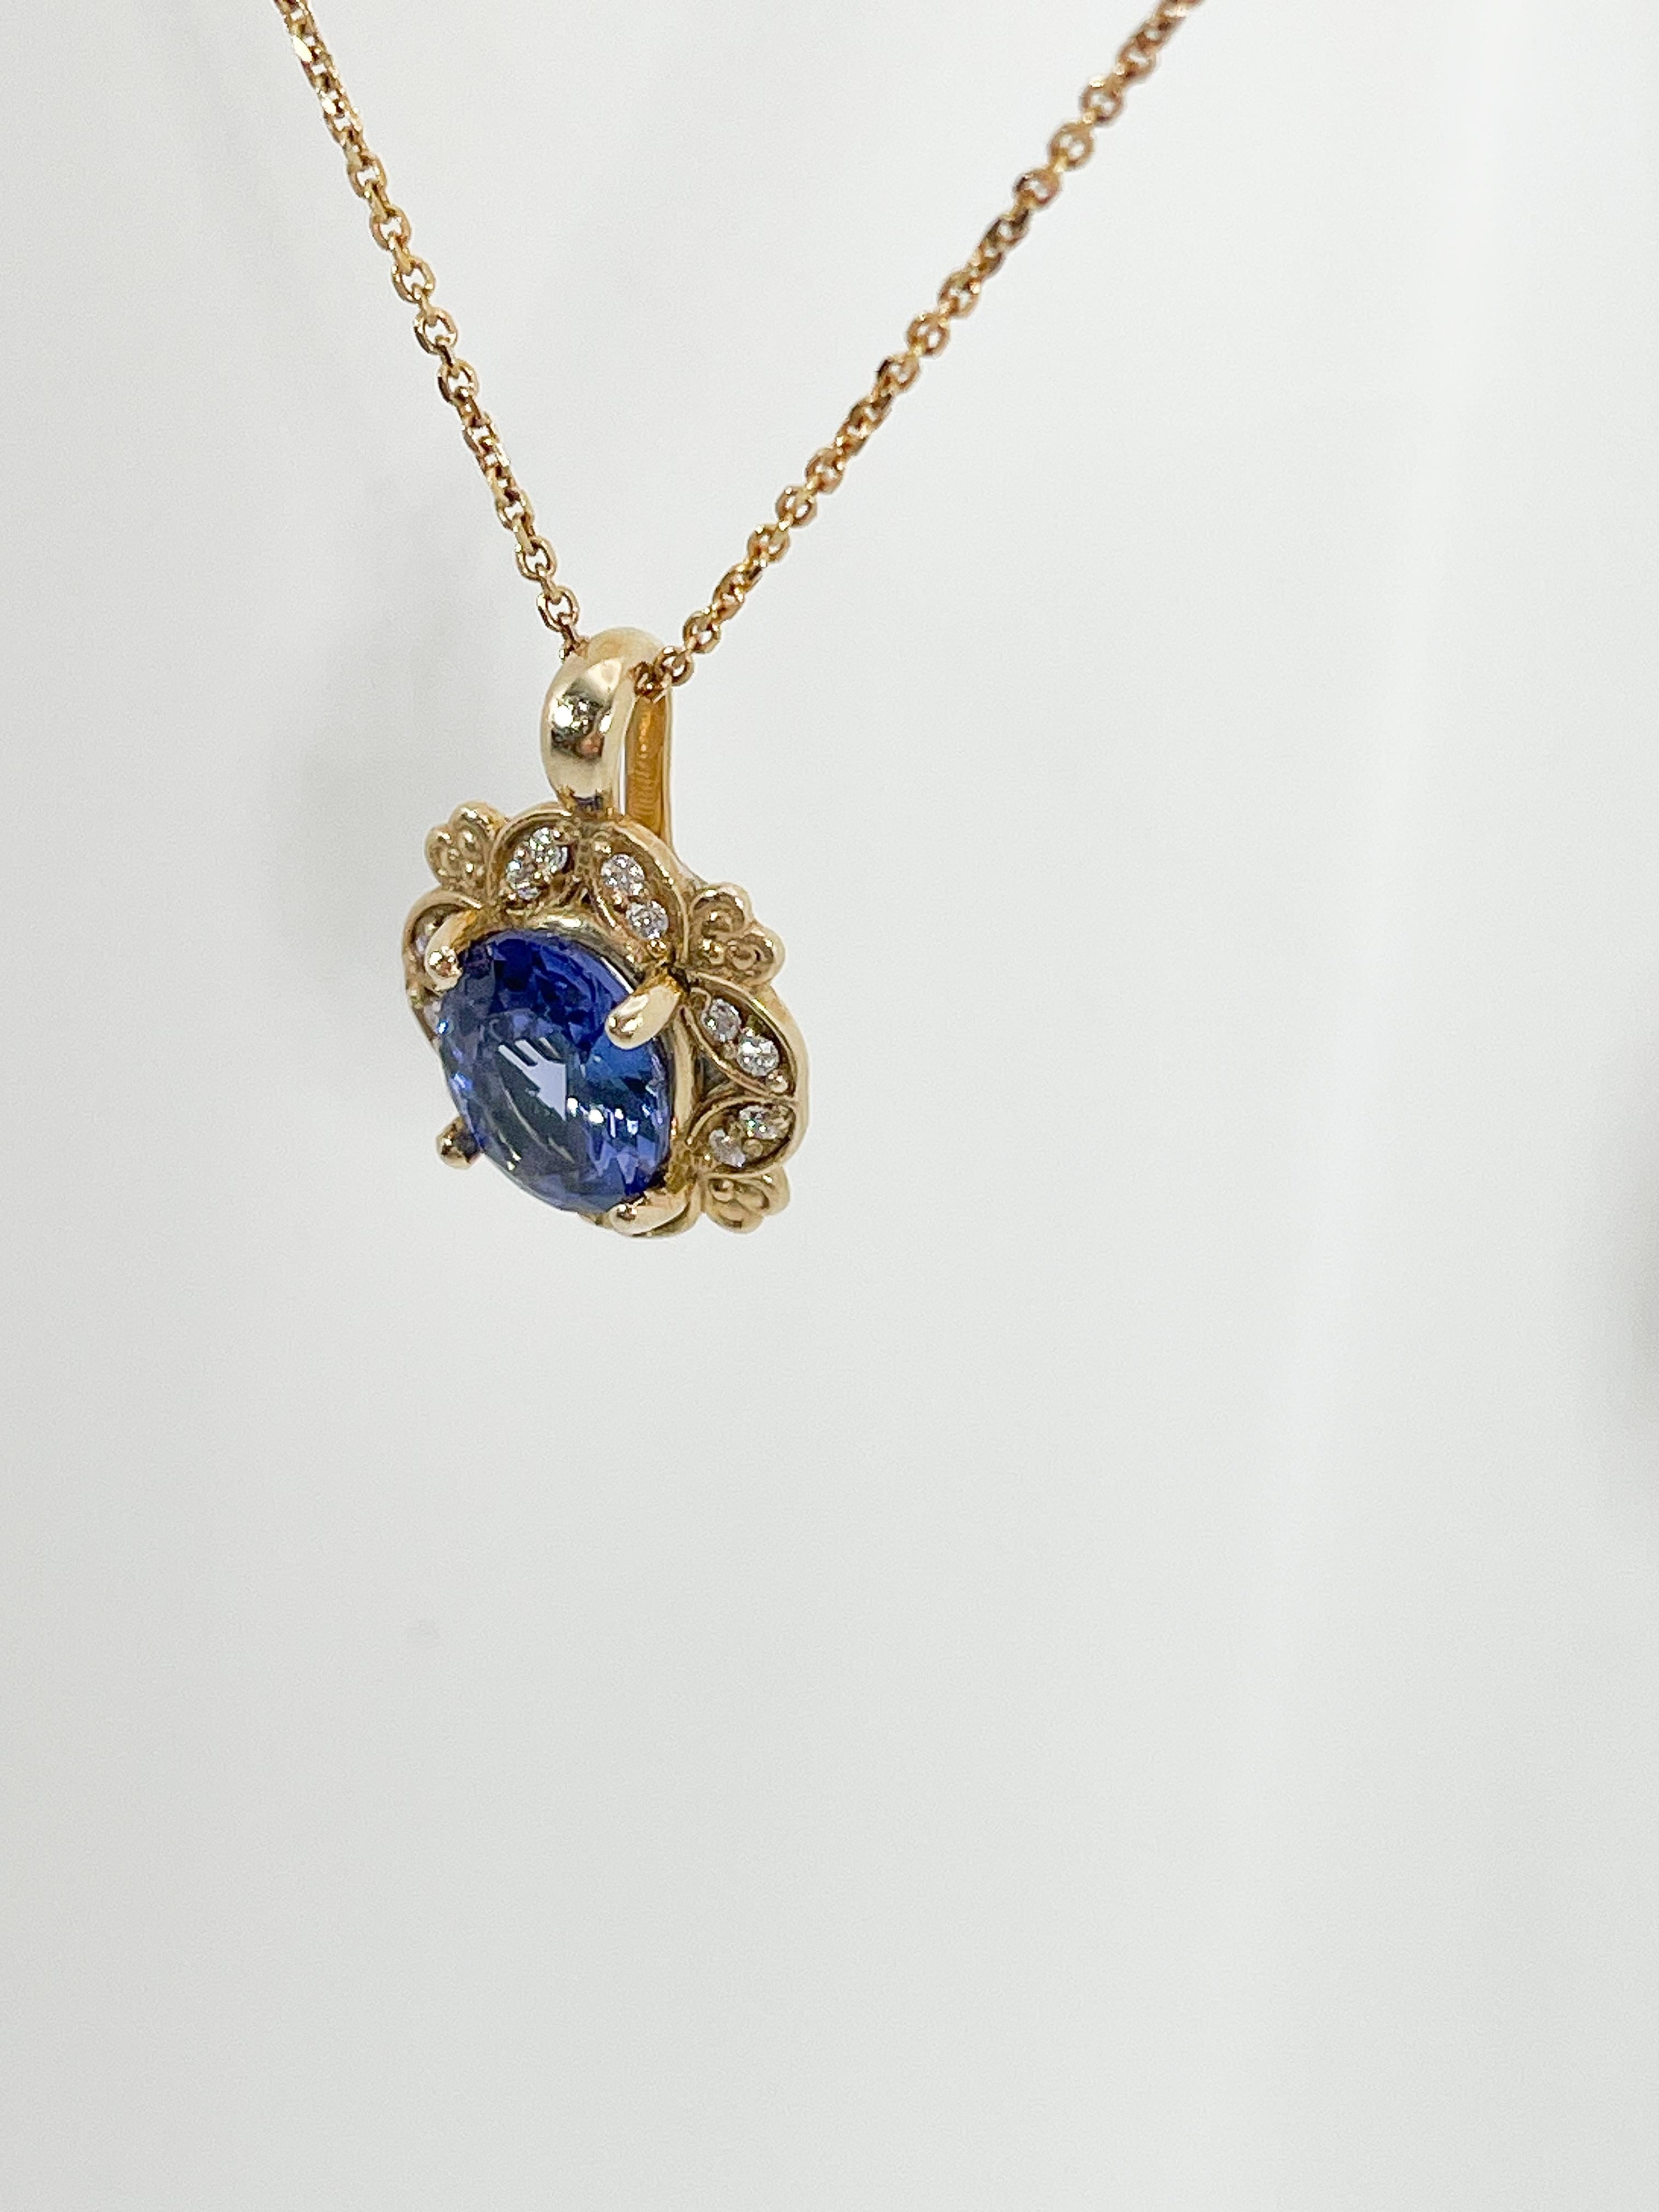 14K Yellow Gold Oval 2.20 Carat Tanzanite and Diamond Pendant Necklace  In Excellent Condition For Sale In Stuart, FL